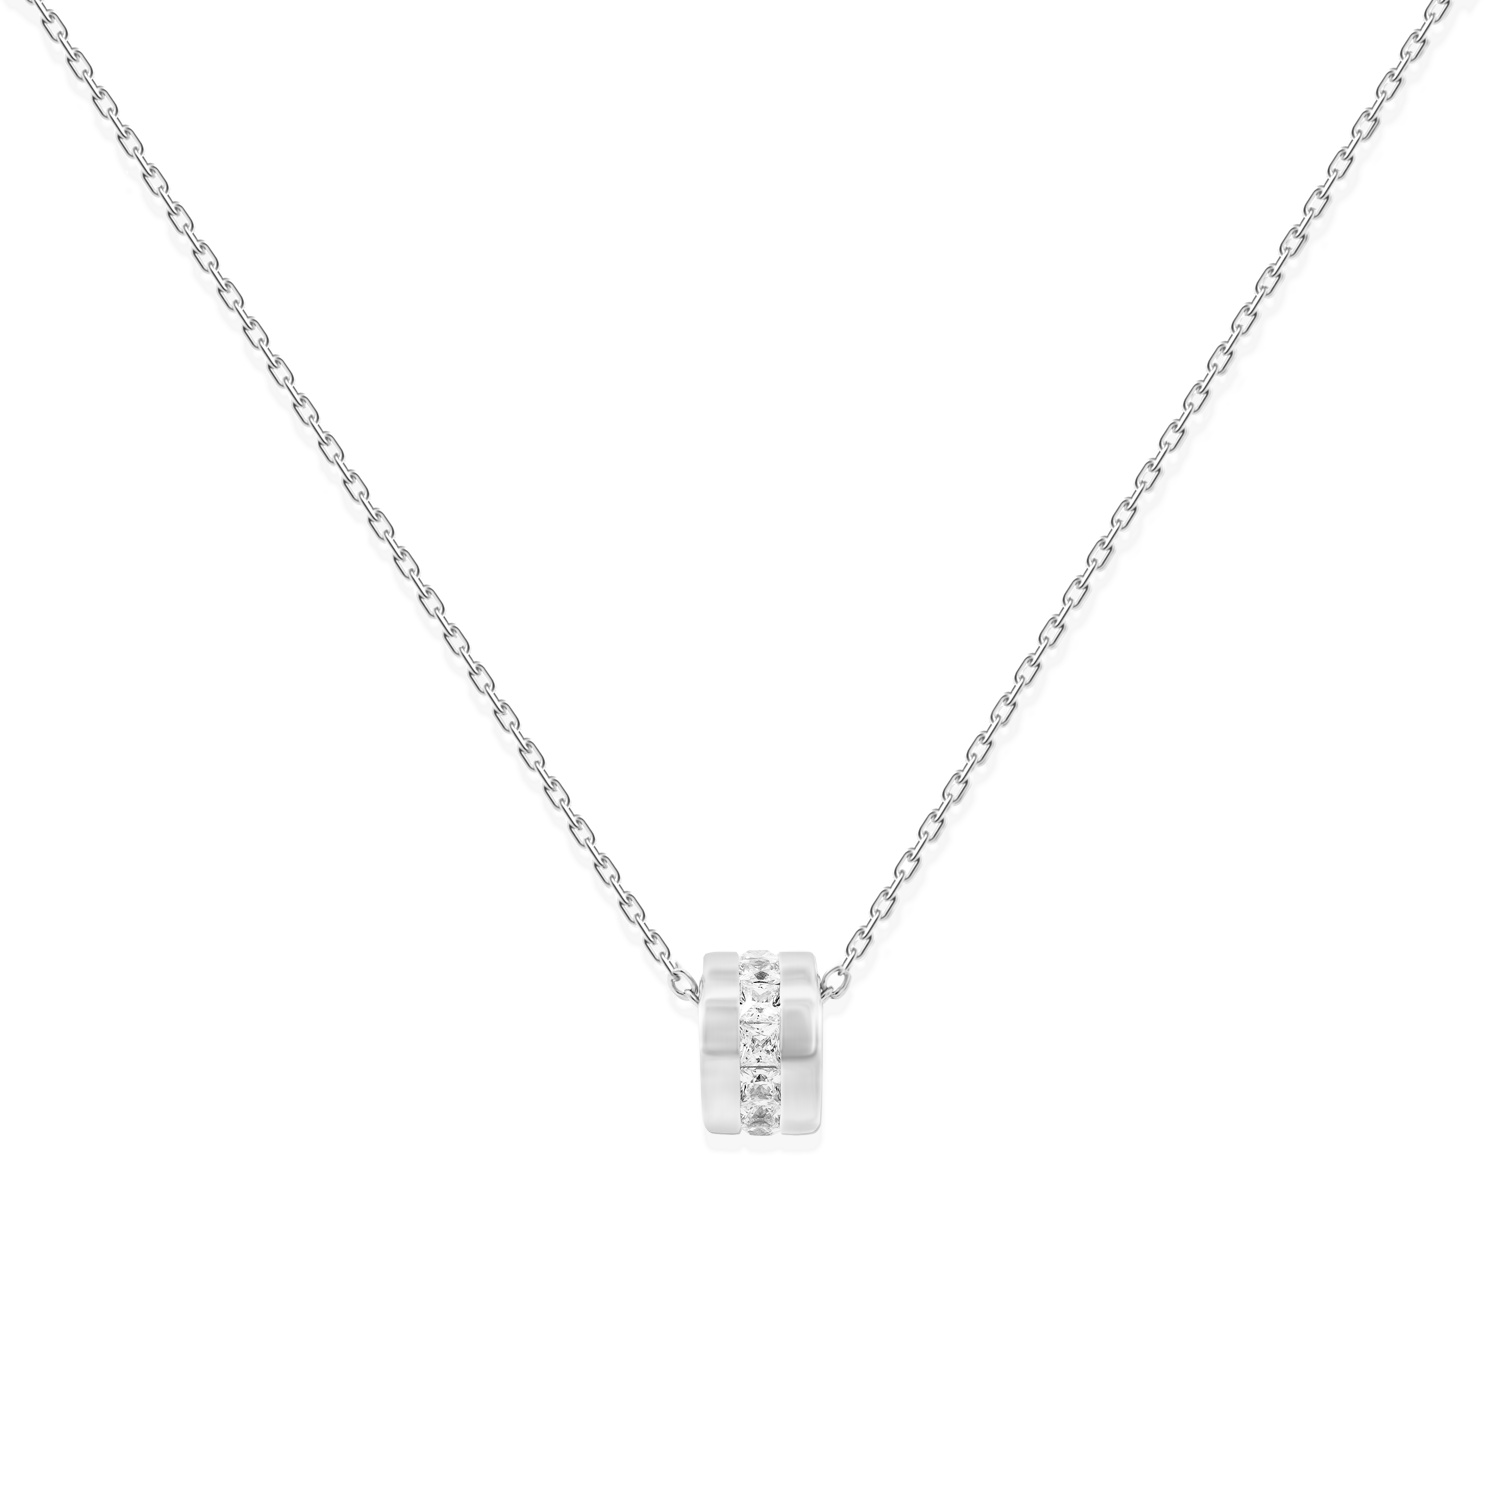 Minimalist and classic necklace in silver with cubic zirconia